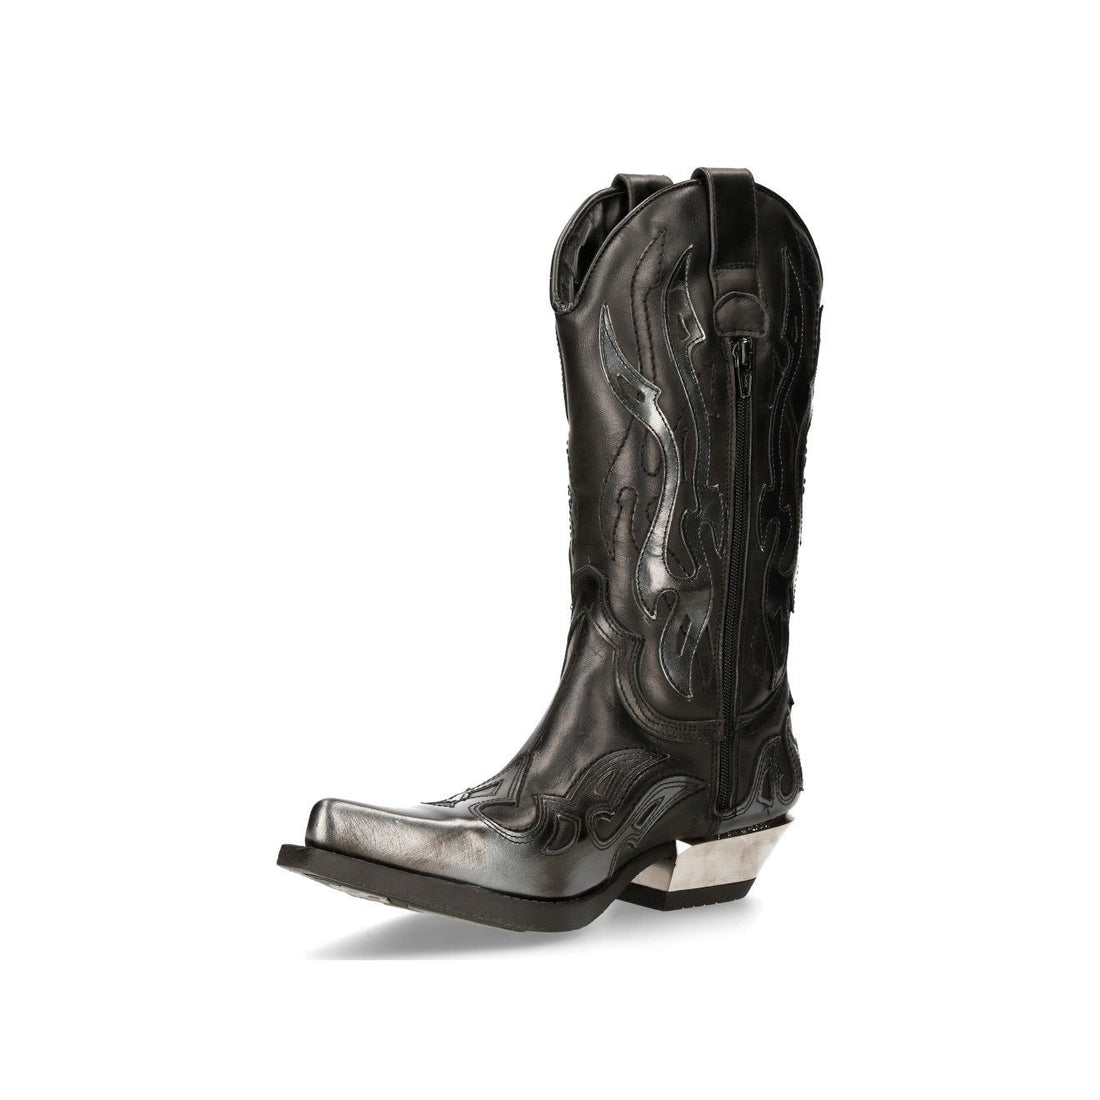 New Rock Flame Accented Black/Silver Leather Biker Cowboy Boots- M-7921-S3 - Upperclass Fashions 